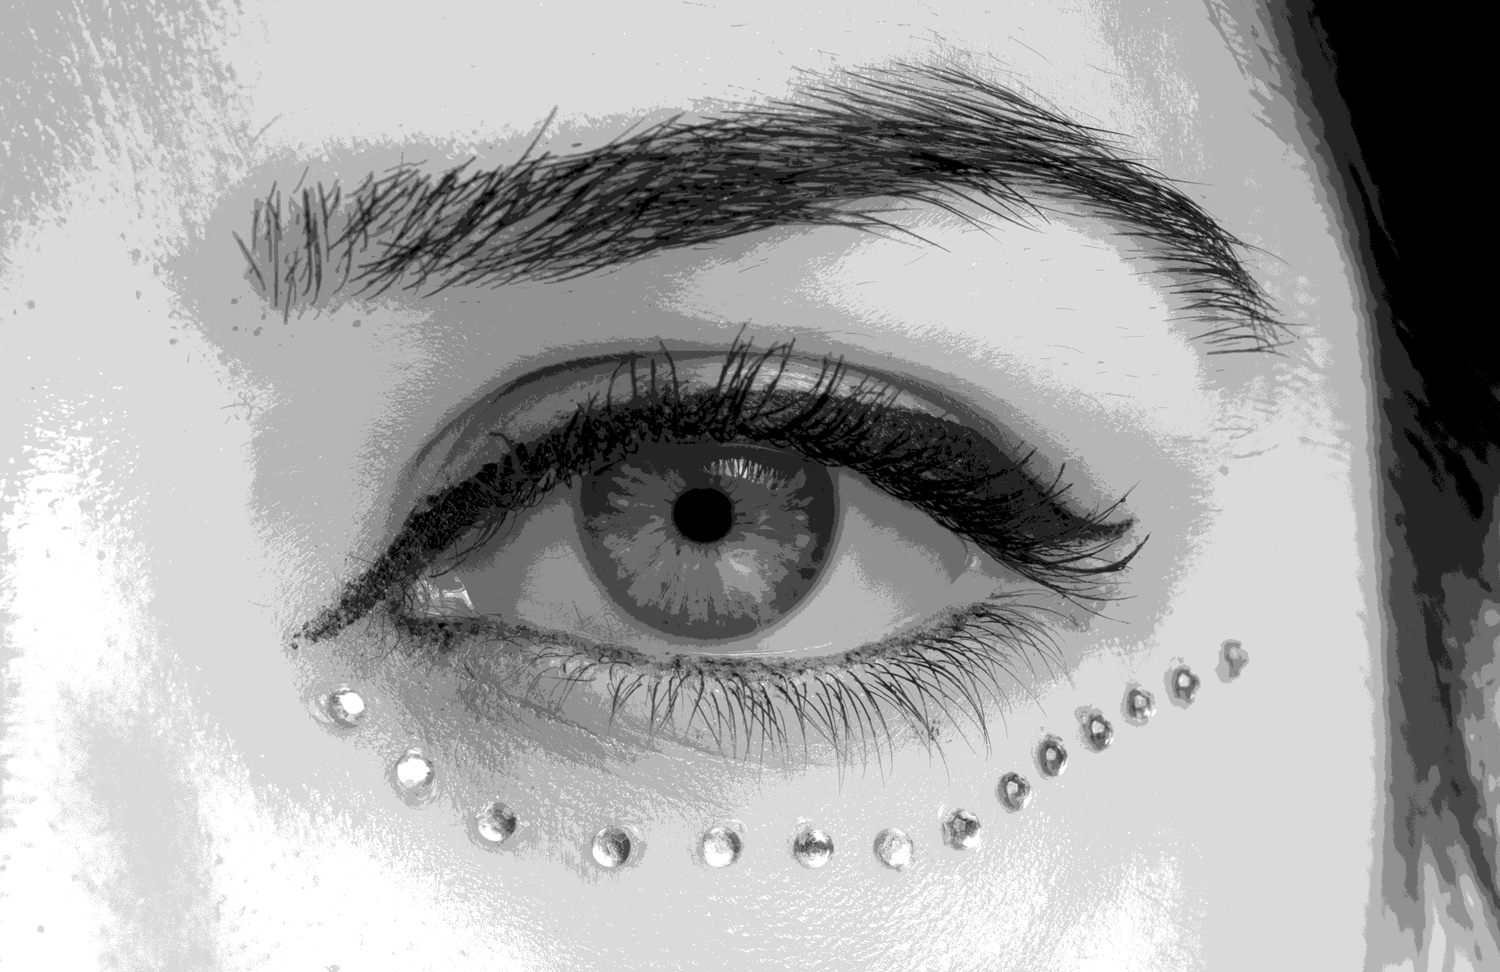 A grayscale version of the posterized eye